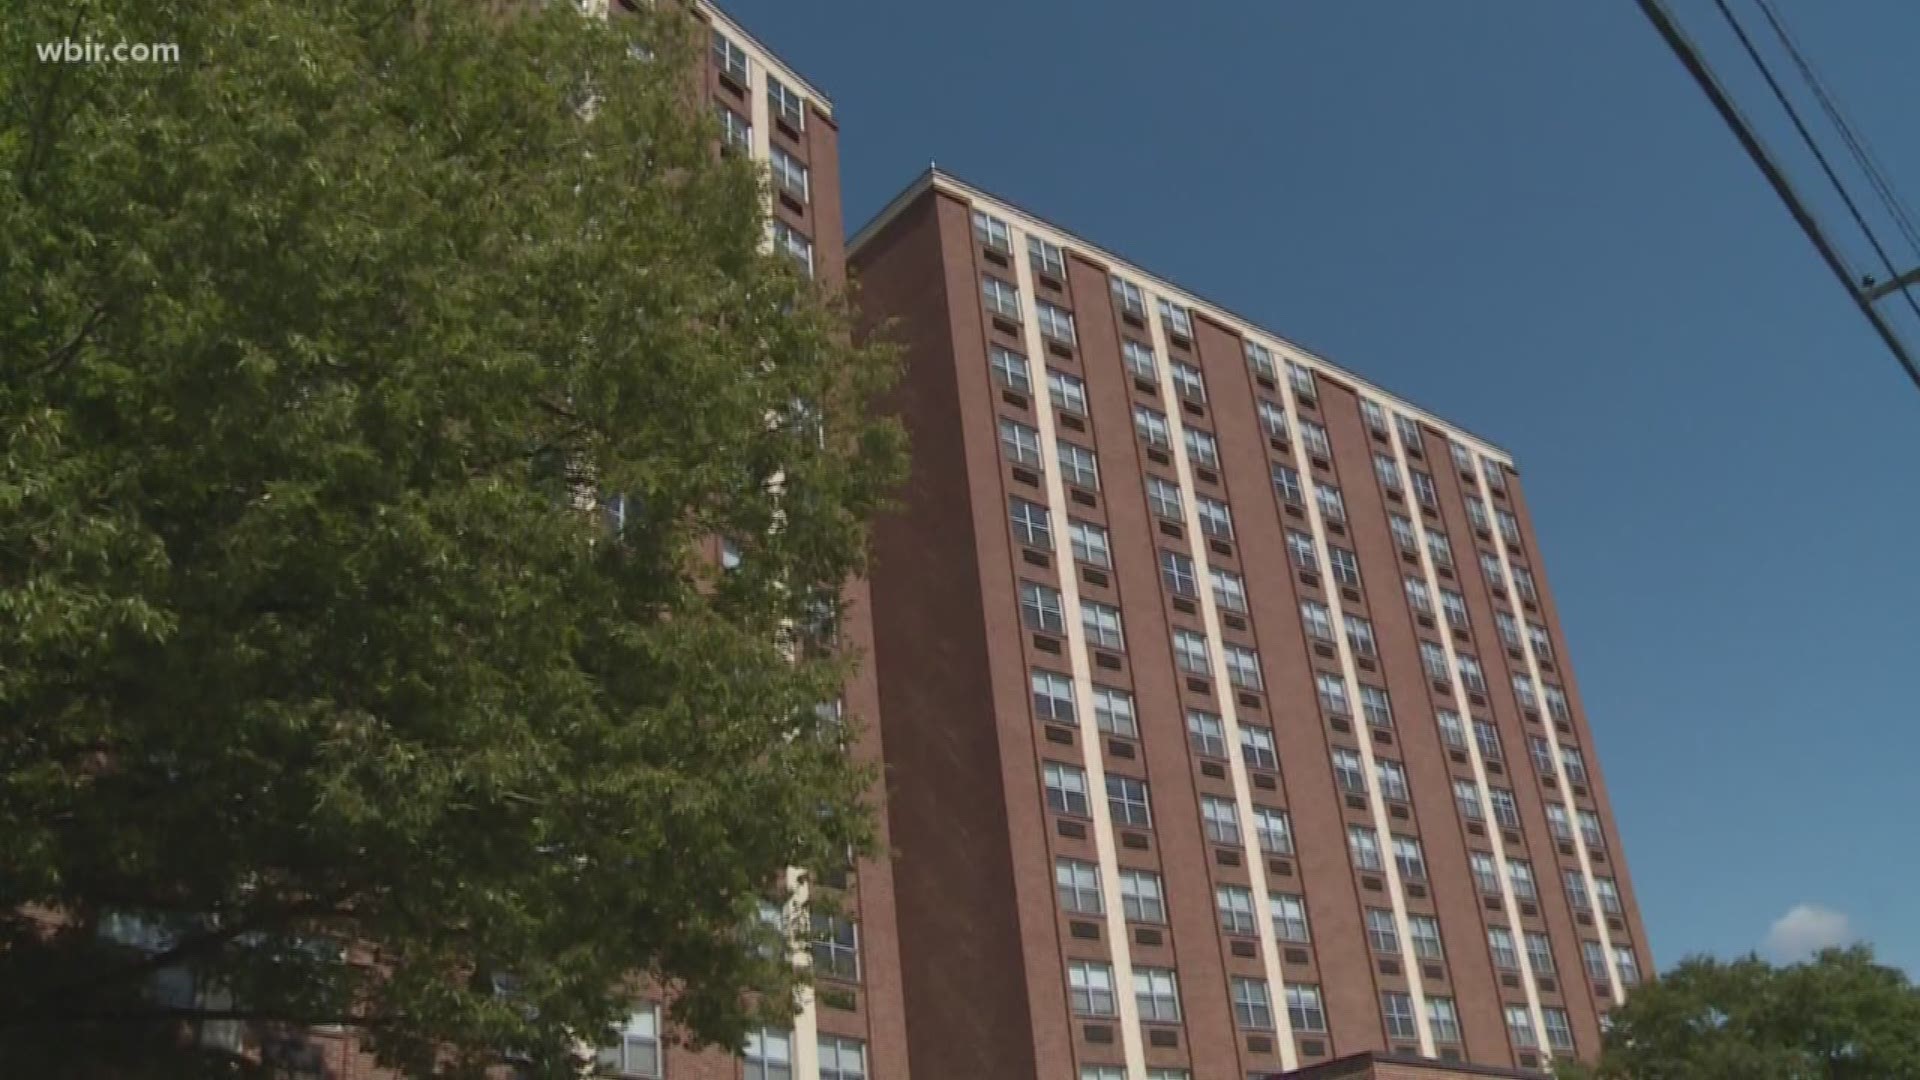 UT students living in laurel hall have started to move off campus after crews found mold in the dorm.